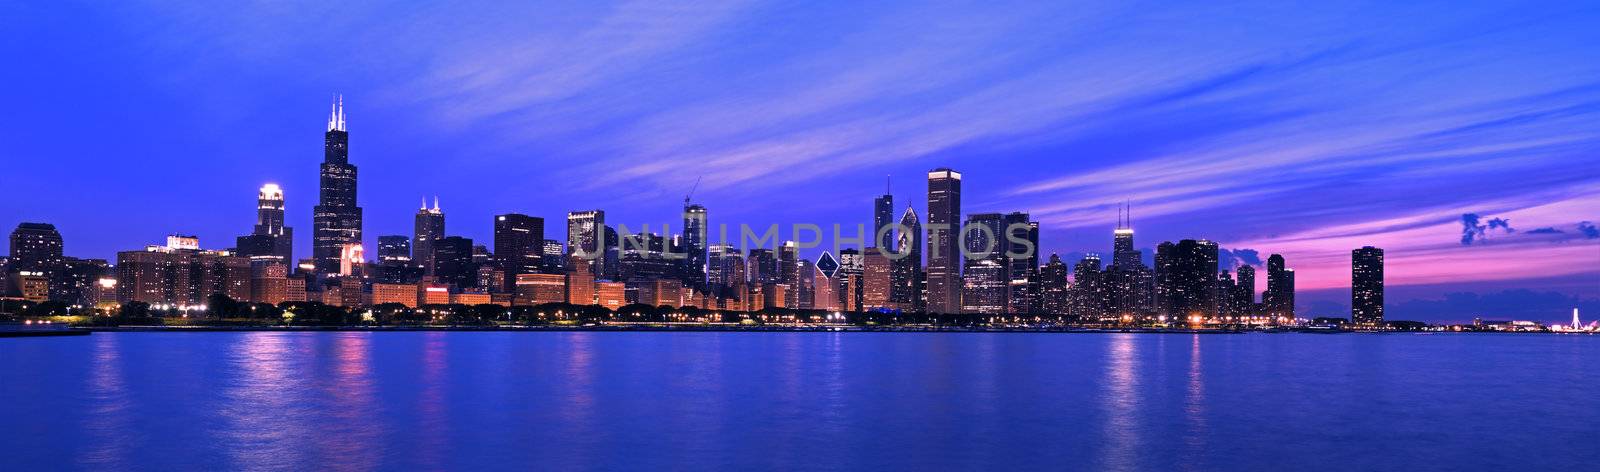 XXL - Famous Chicago Panorama by benkrut